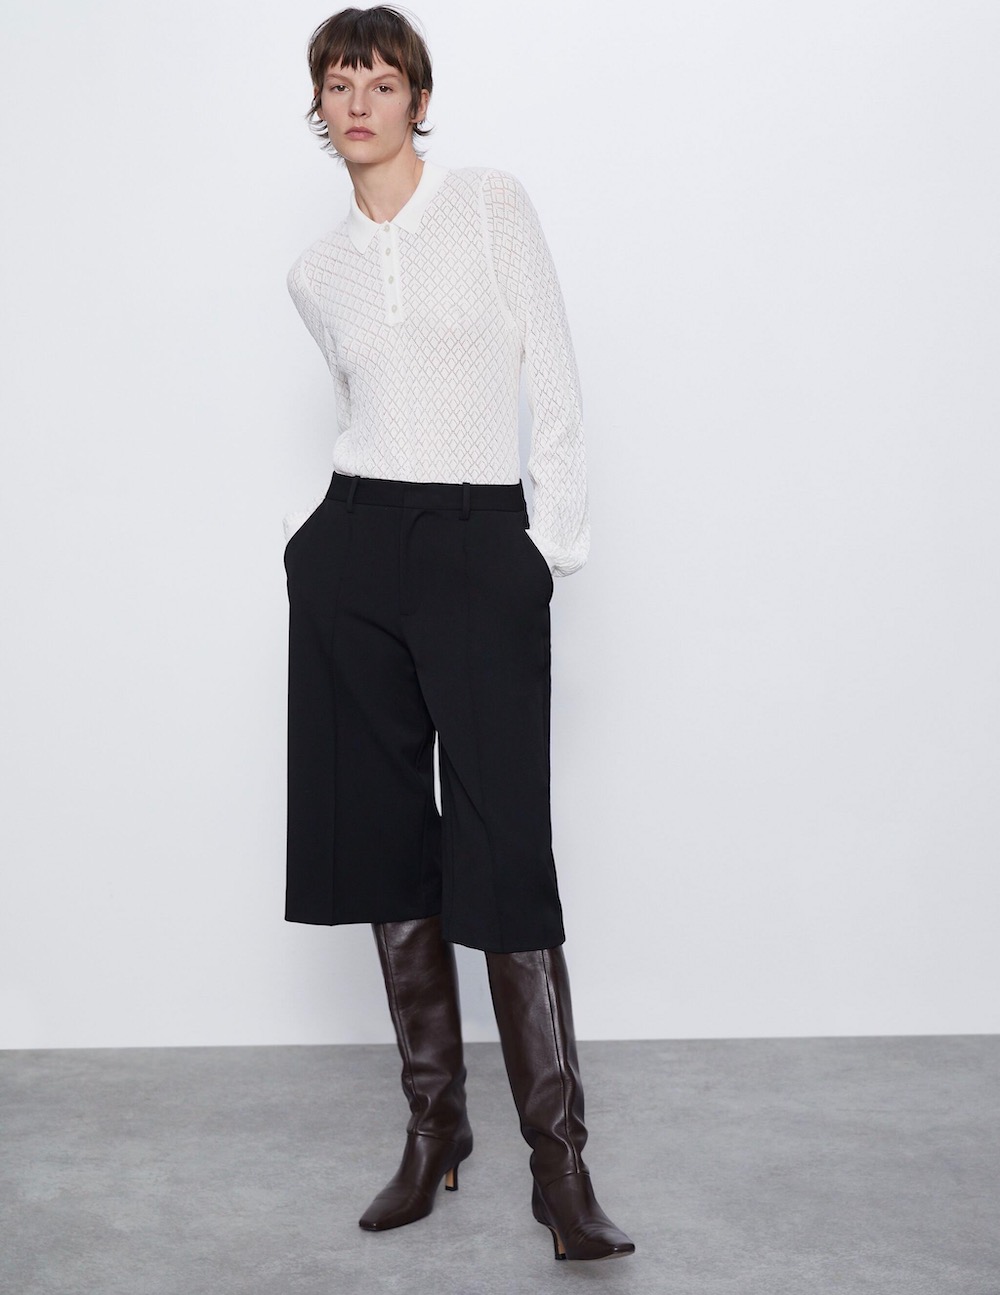 Long Shorts You Can Wear to Work - theFashionSpot